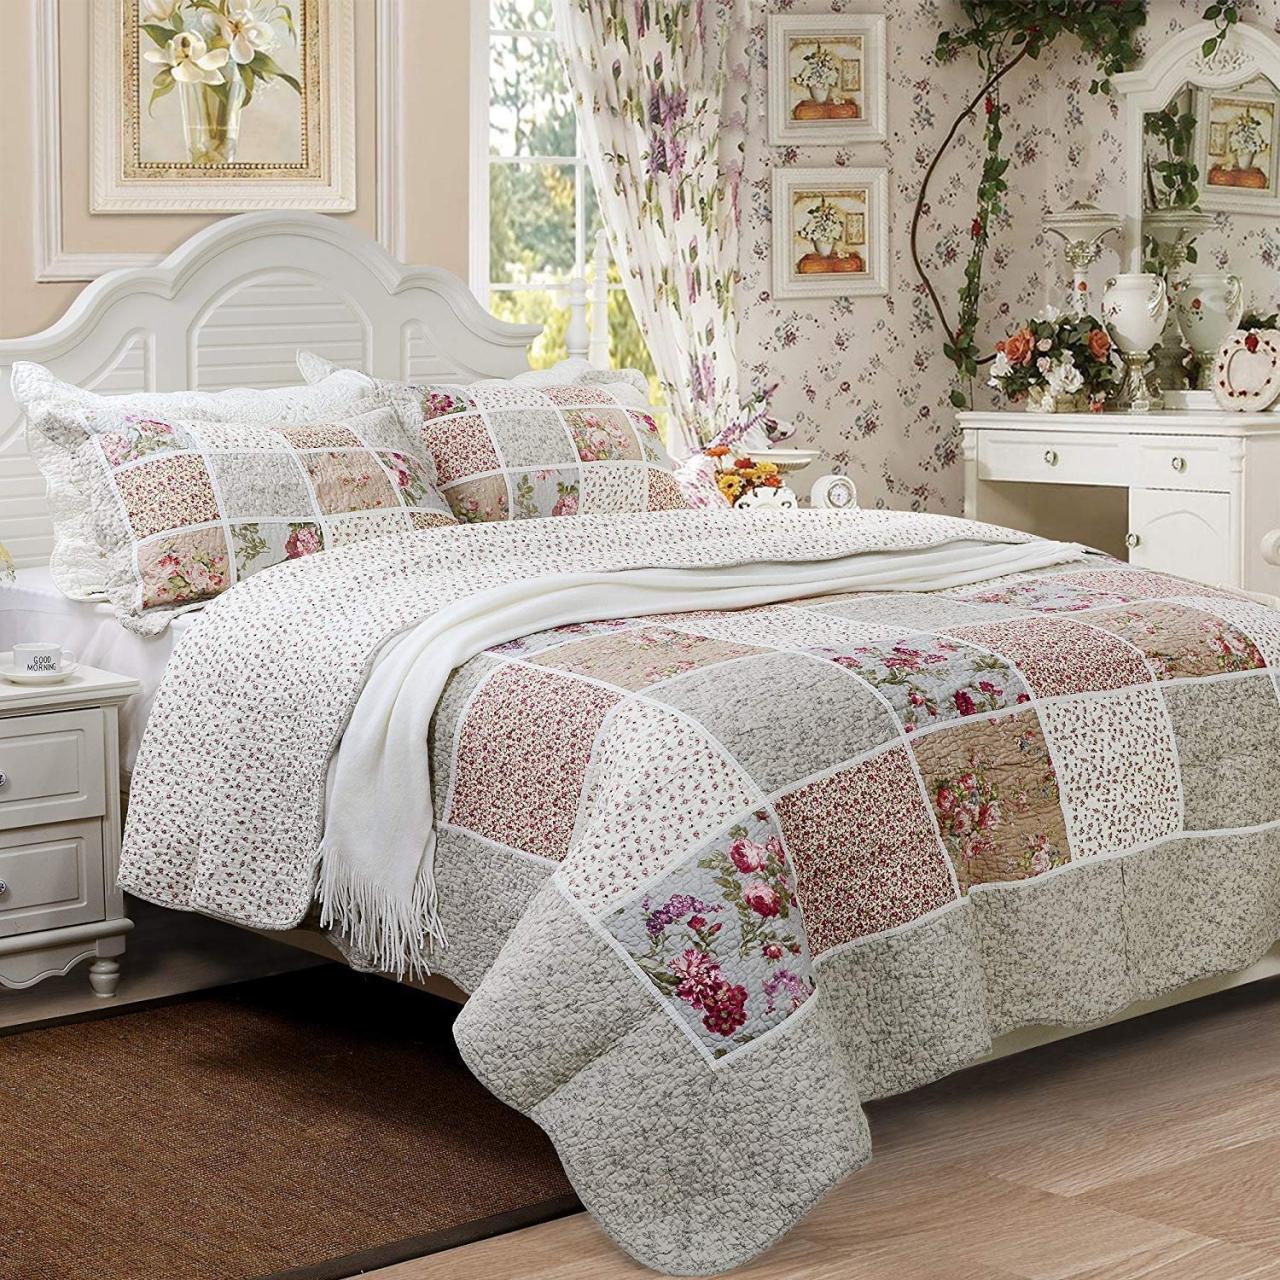 Queen Size Farmhouse Bedding Vintage Bedding Sets Girls Patchwork Quilted Bedspread Cotton Quilts Se On Luulla